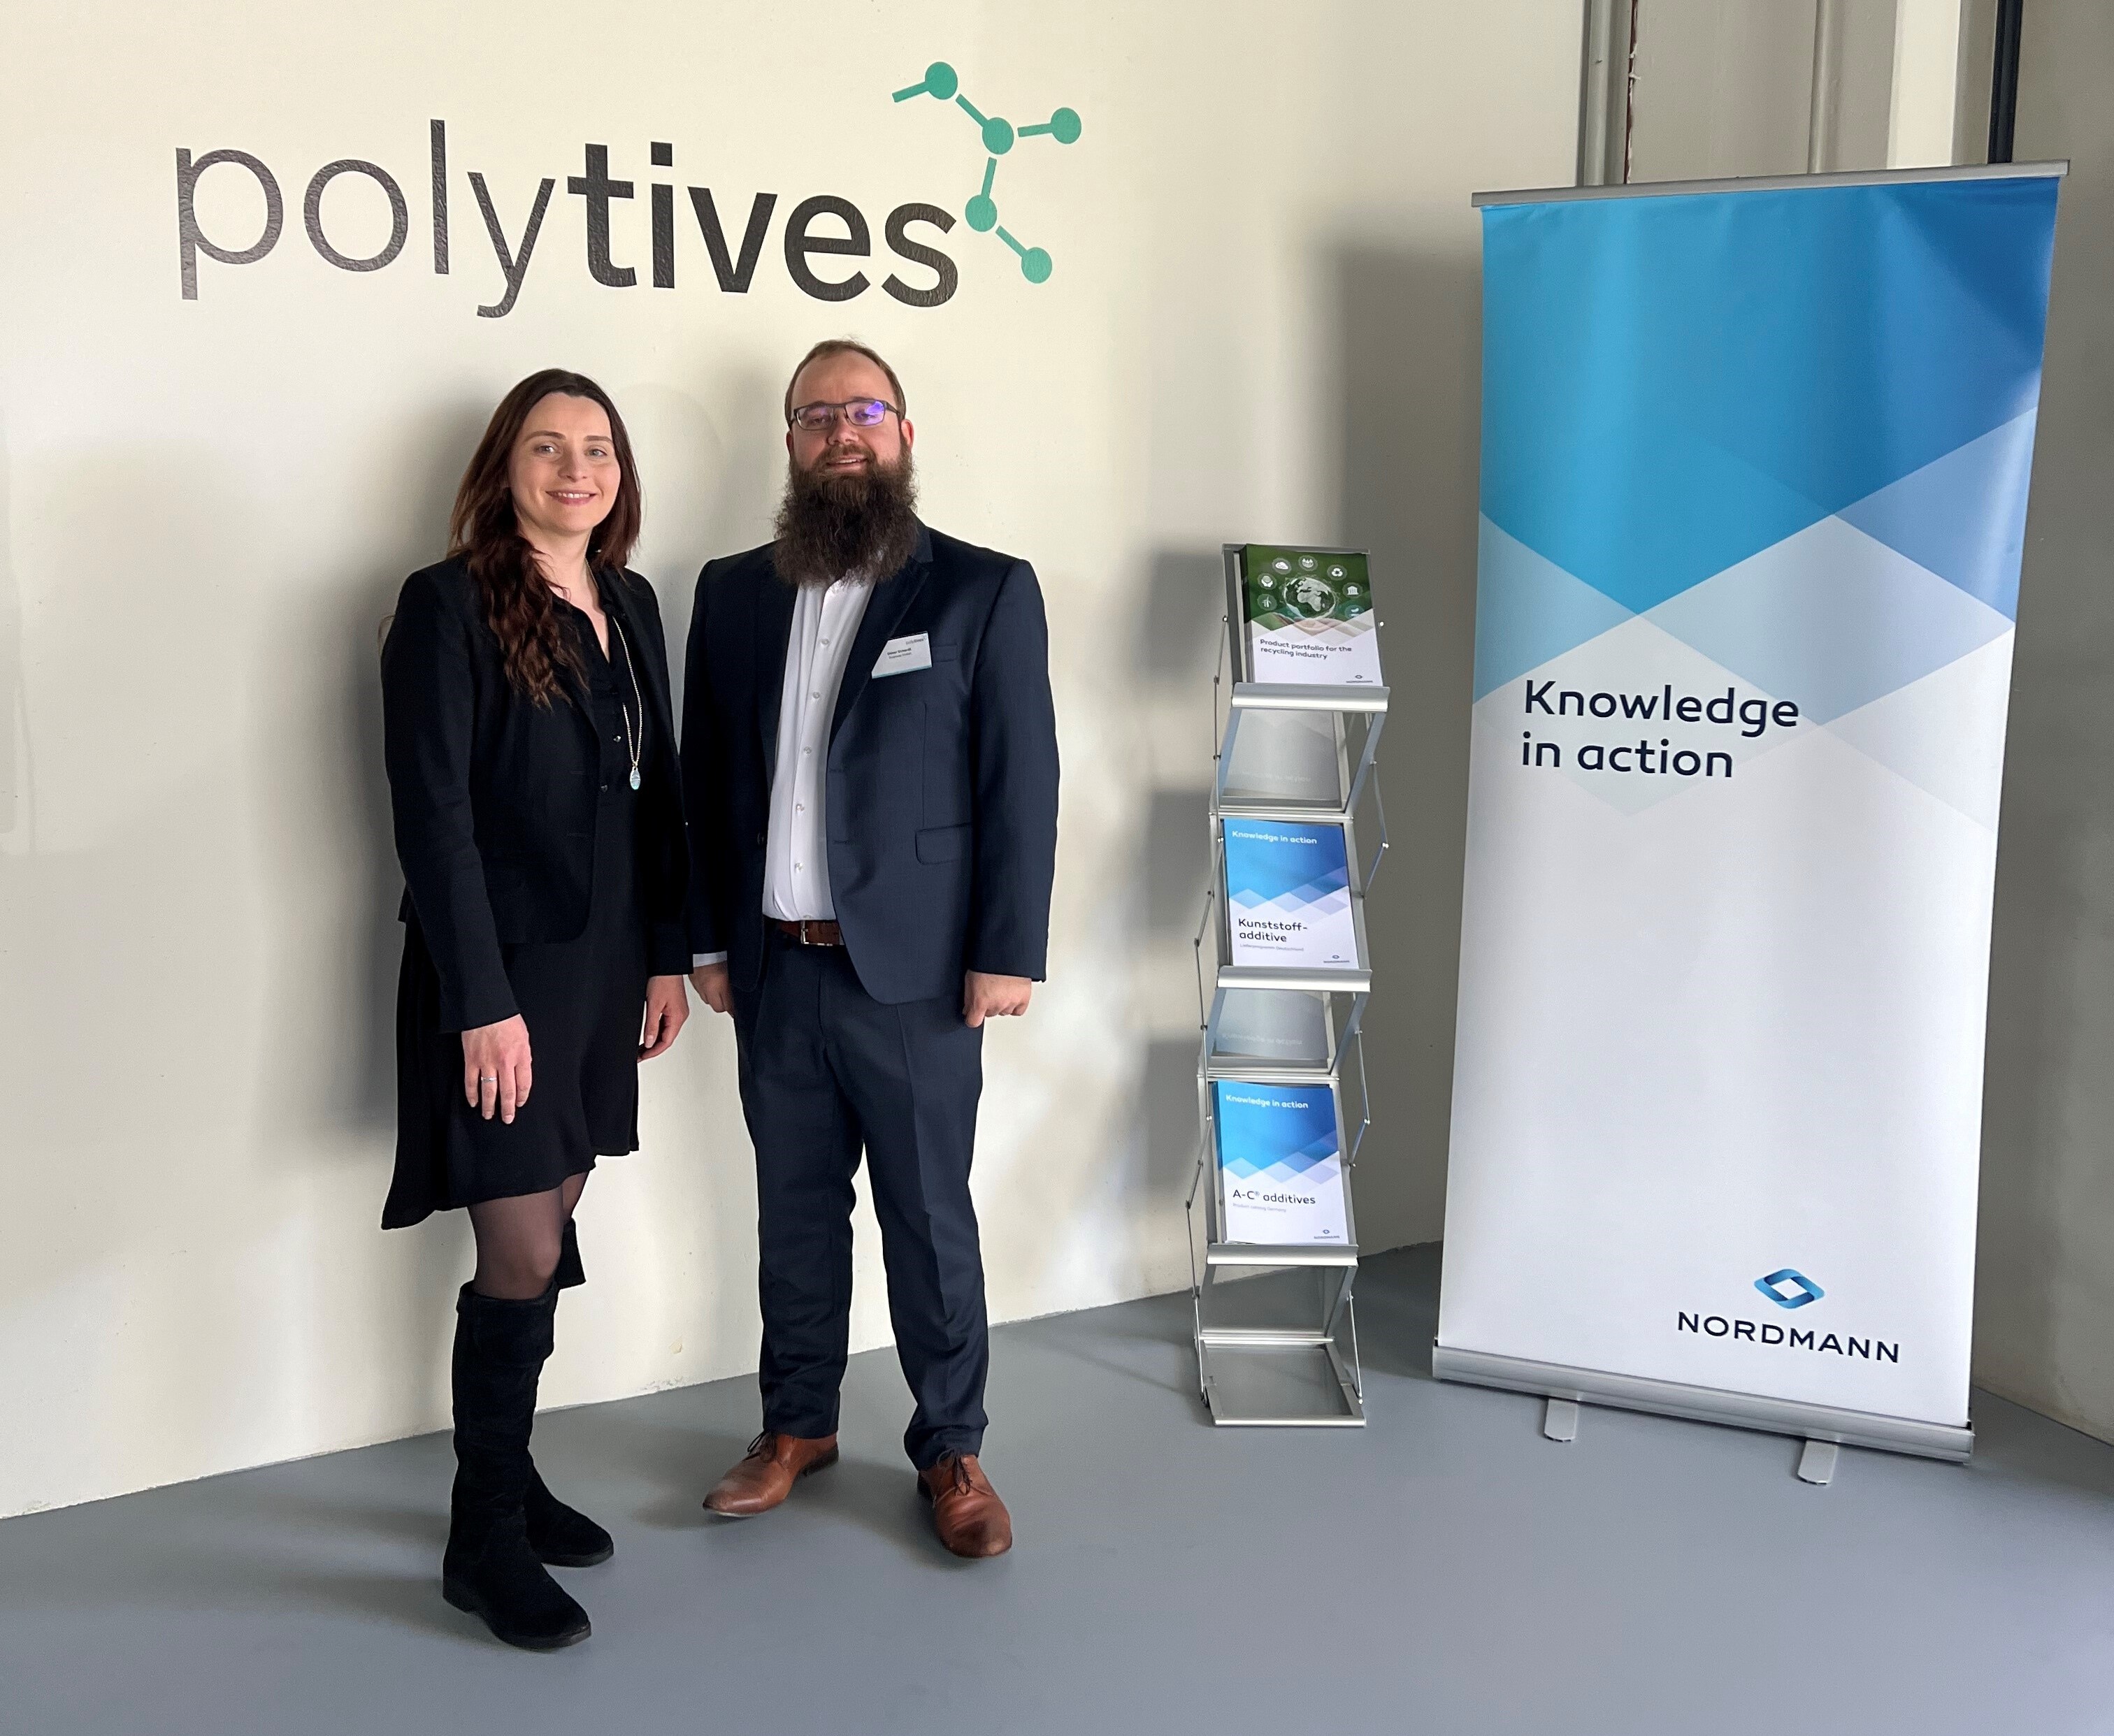 Dr. Irina Fink, Technical Sales & Product Manager Polymer Additives, Nordmann and Oliver Eckardt, Founder and Managing Director Polytives (Photo: Polytives)